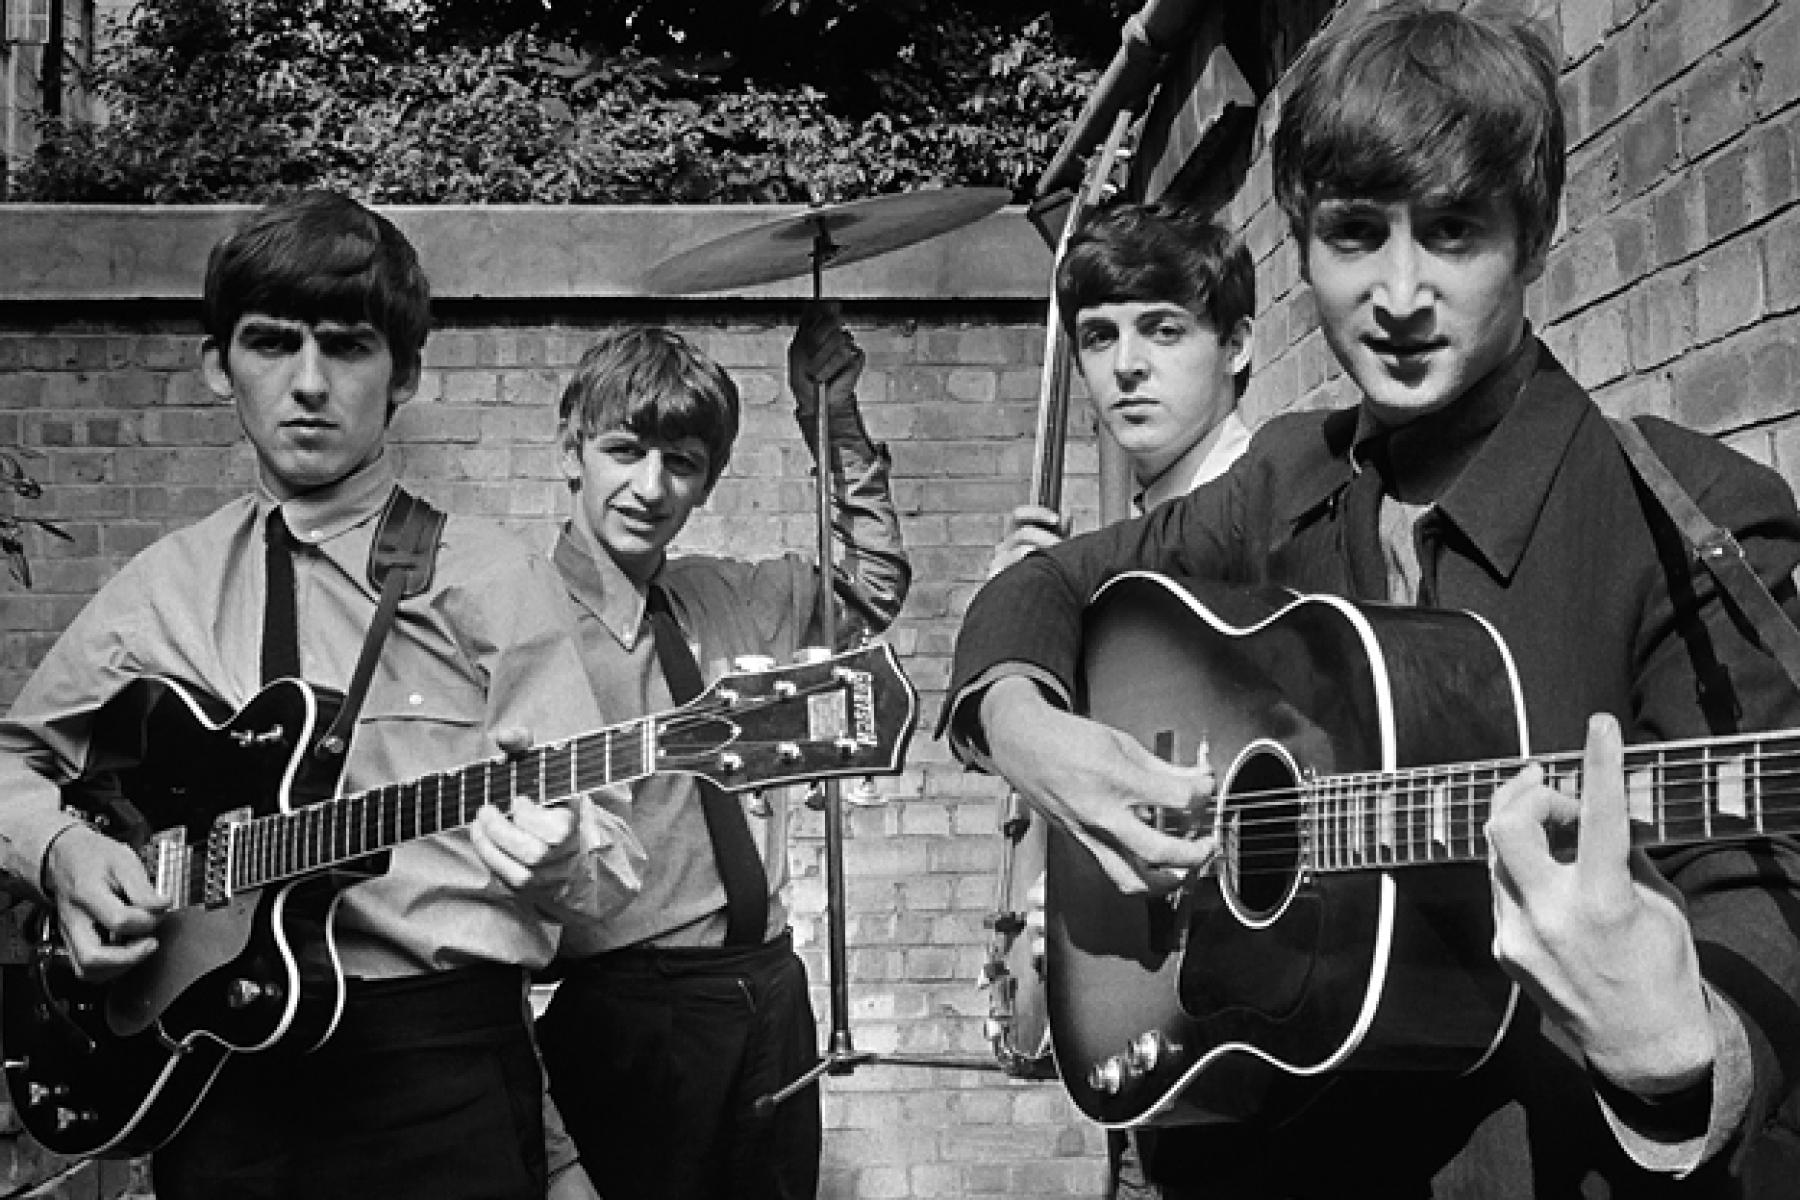 Terry O'Neill
The Beatles, 1963, Printed Later
Silver gelatin print
signed and numbered edition 48 of 50
with certificate of authenticity

Terry O'Neill CBE (1938-2019) was an eminent English photographer known for his masterful documentation of the